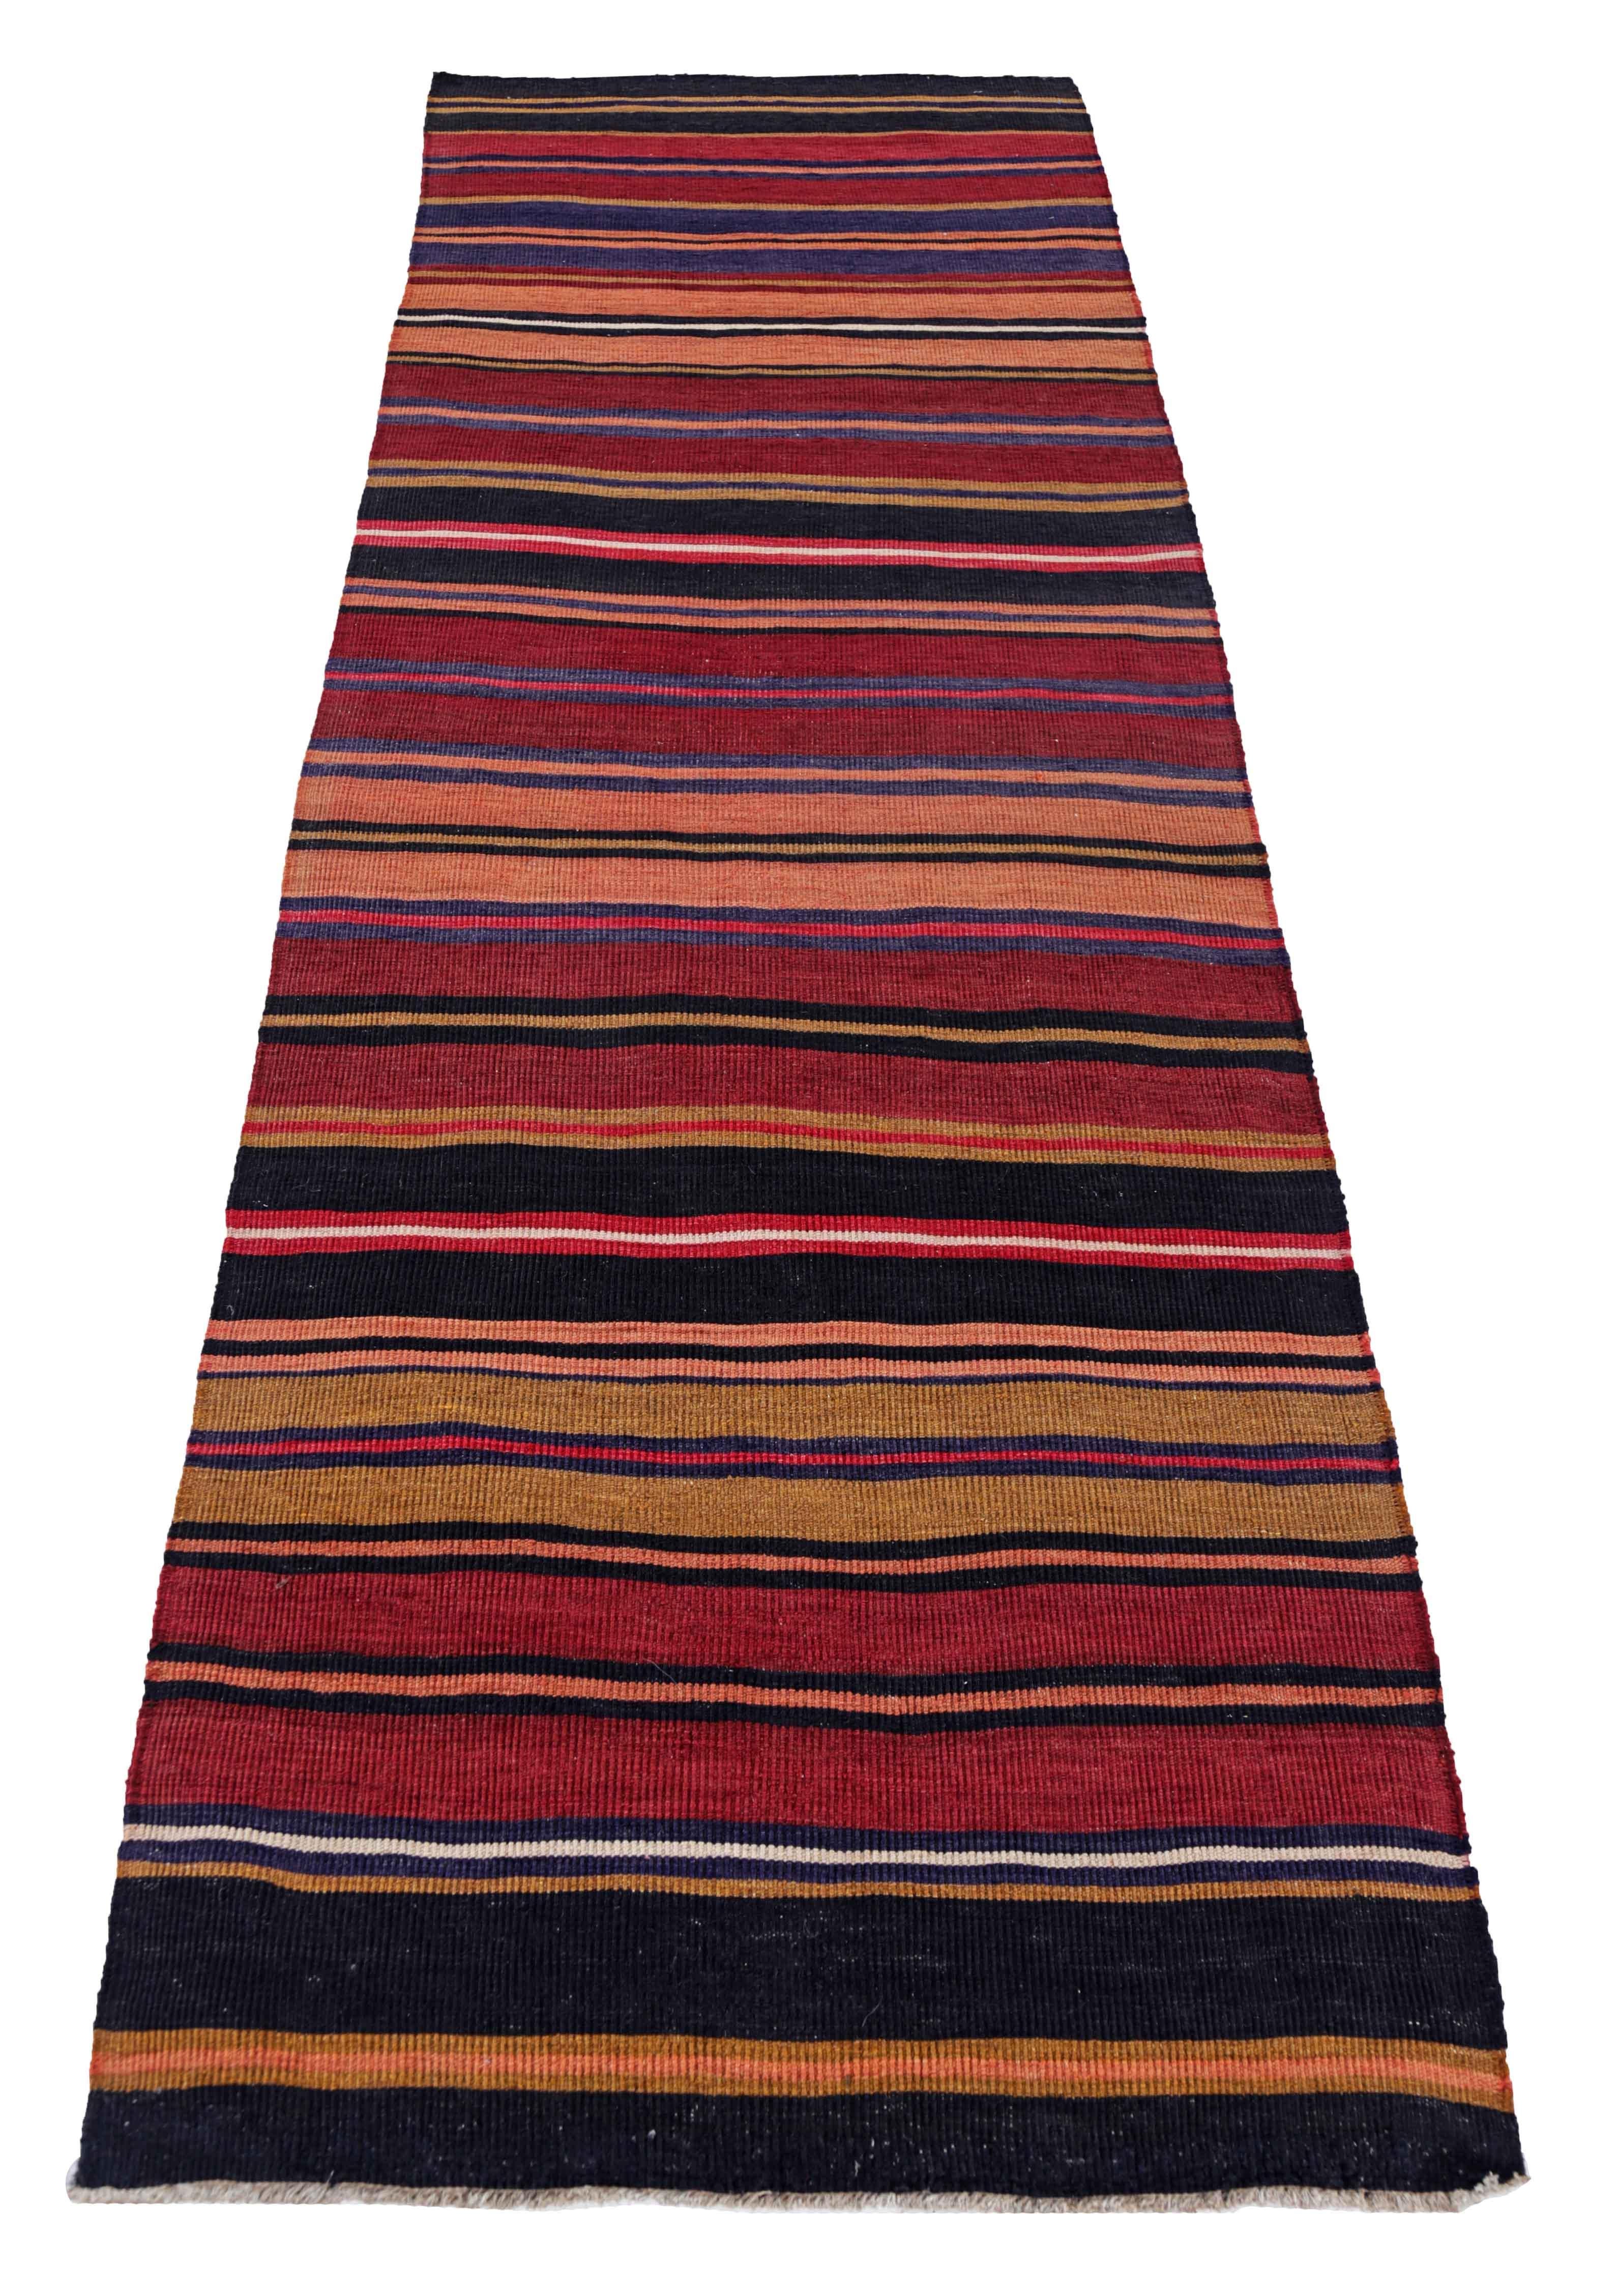 Antique Persian area rug handwoven from the finest sheep’s wool. It’s colored with all-natural vegetable dyes that are safe for humans and pets. It’s a traditional Kilim design handwoven by expert artisans. It’s a lovely runner rug that can be